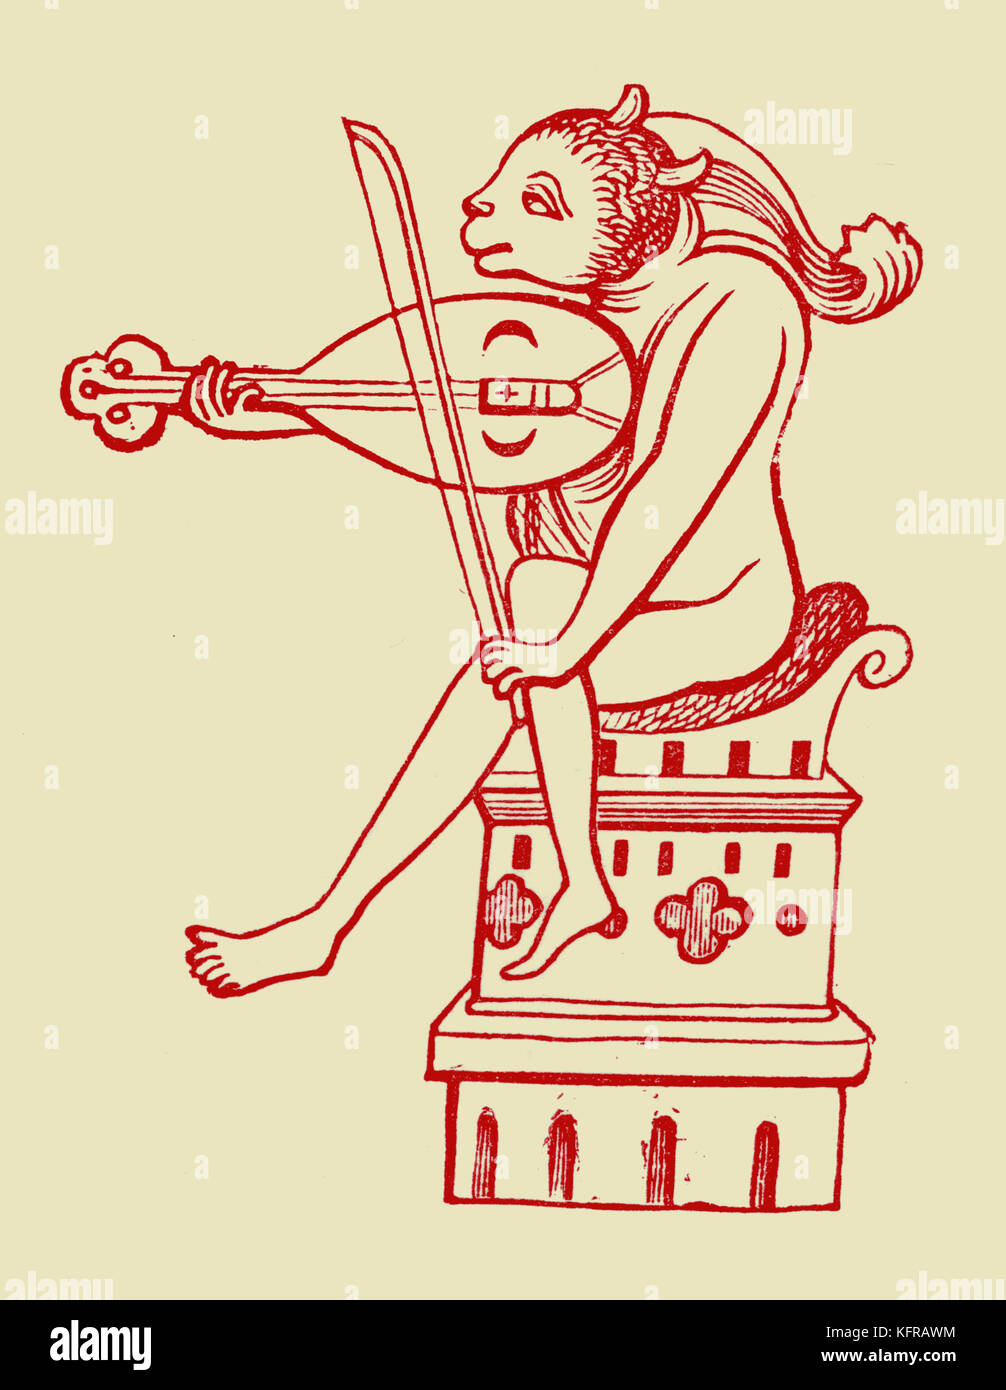 Vielle with three strings, reproduced from a thirteenth century illustration of a sculpture on the Cathedral of Amiens. The vielle is a bowed stringed instrument, with a longer and deeper body than the violin. It was popular throughout Europe in the medieval period. Stock Photo